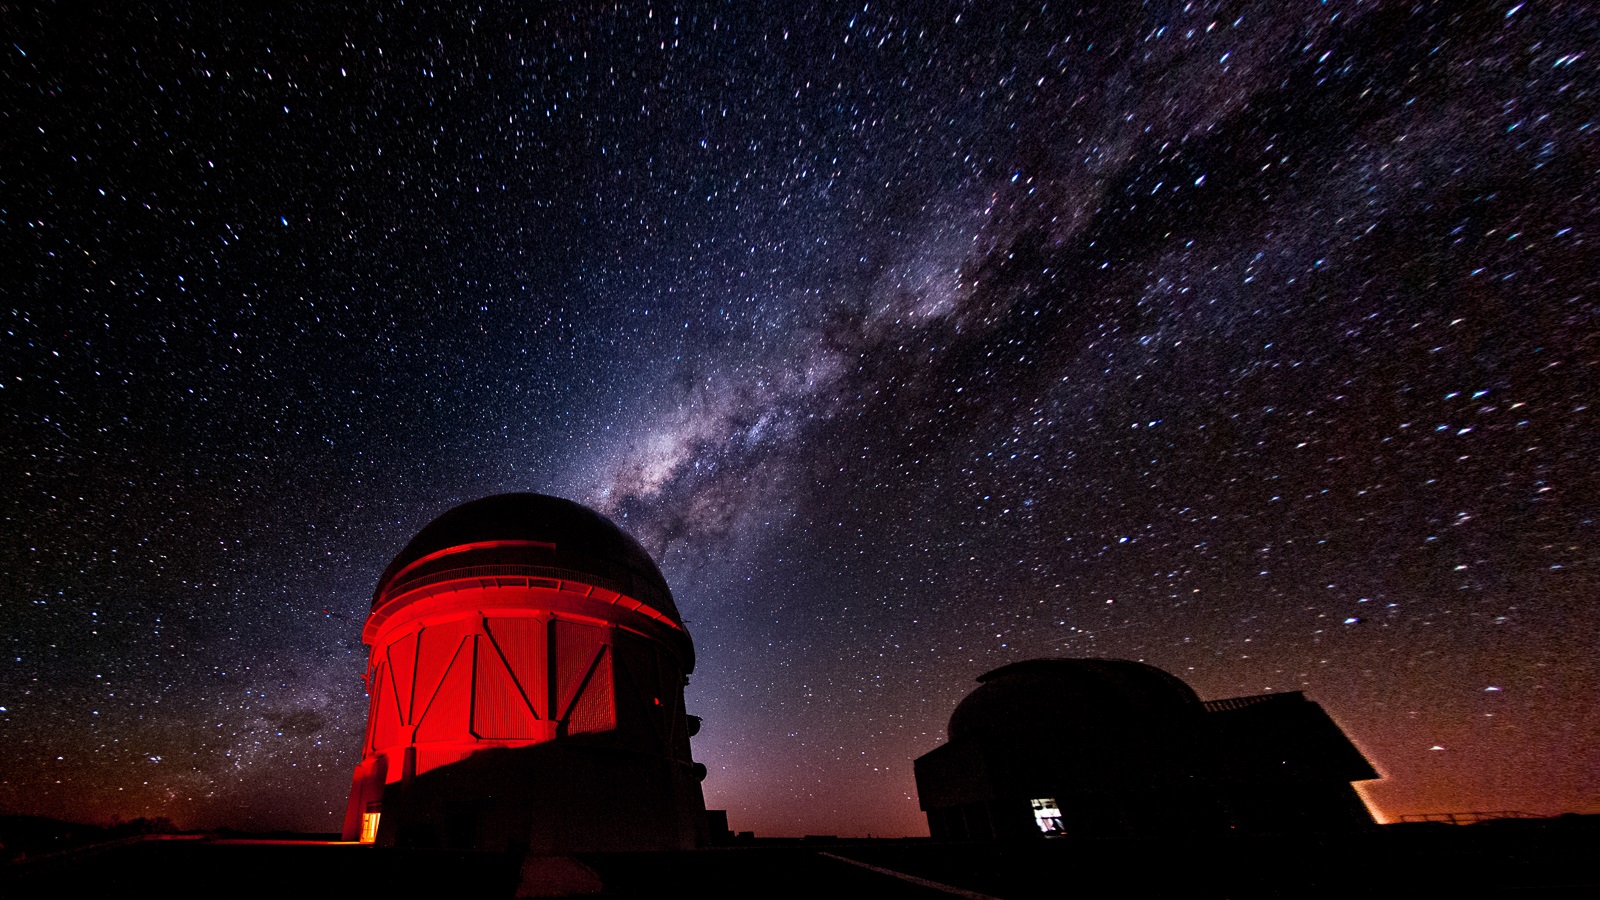 The Dark Energy Survey uses a 570-megapixel camera mounted on the Blanco Telescope, at the CTI Observatory in Chile, to image 5,000 square degrees of southern sky. (Image by Fermilab.)